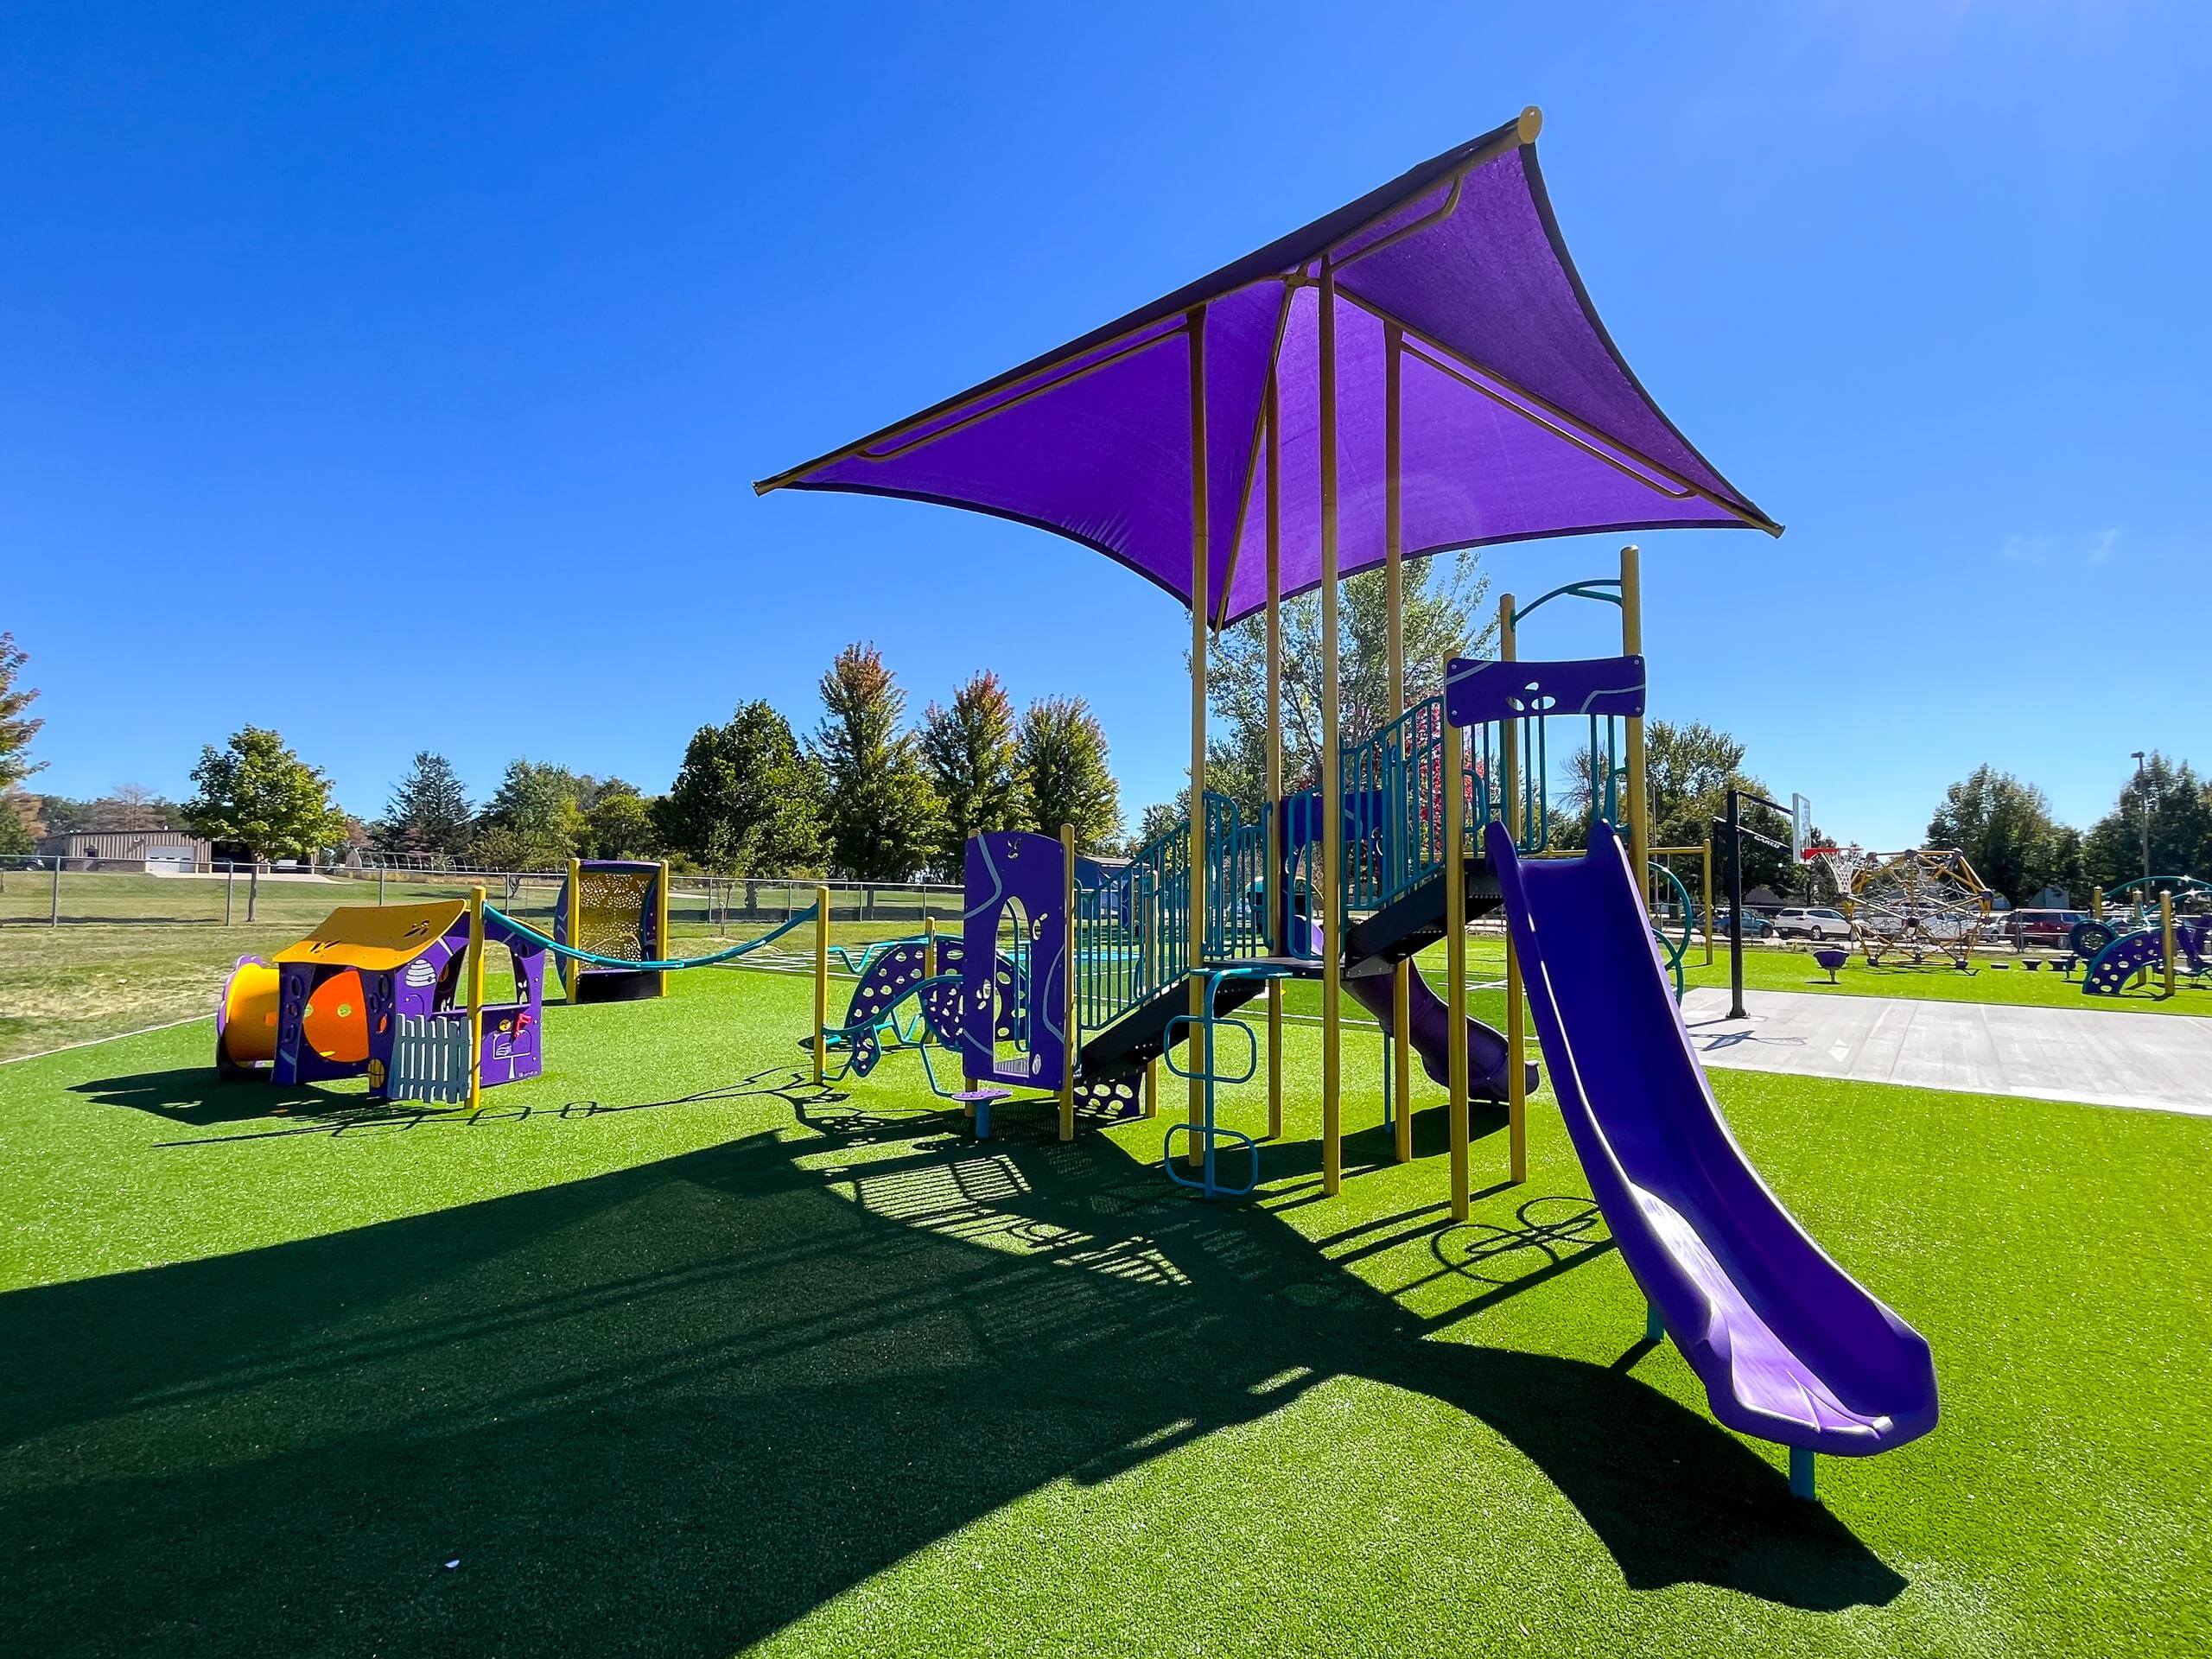 Sunny playground with vibrant purple shades, slides, and climbing structures on green artificial grass.